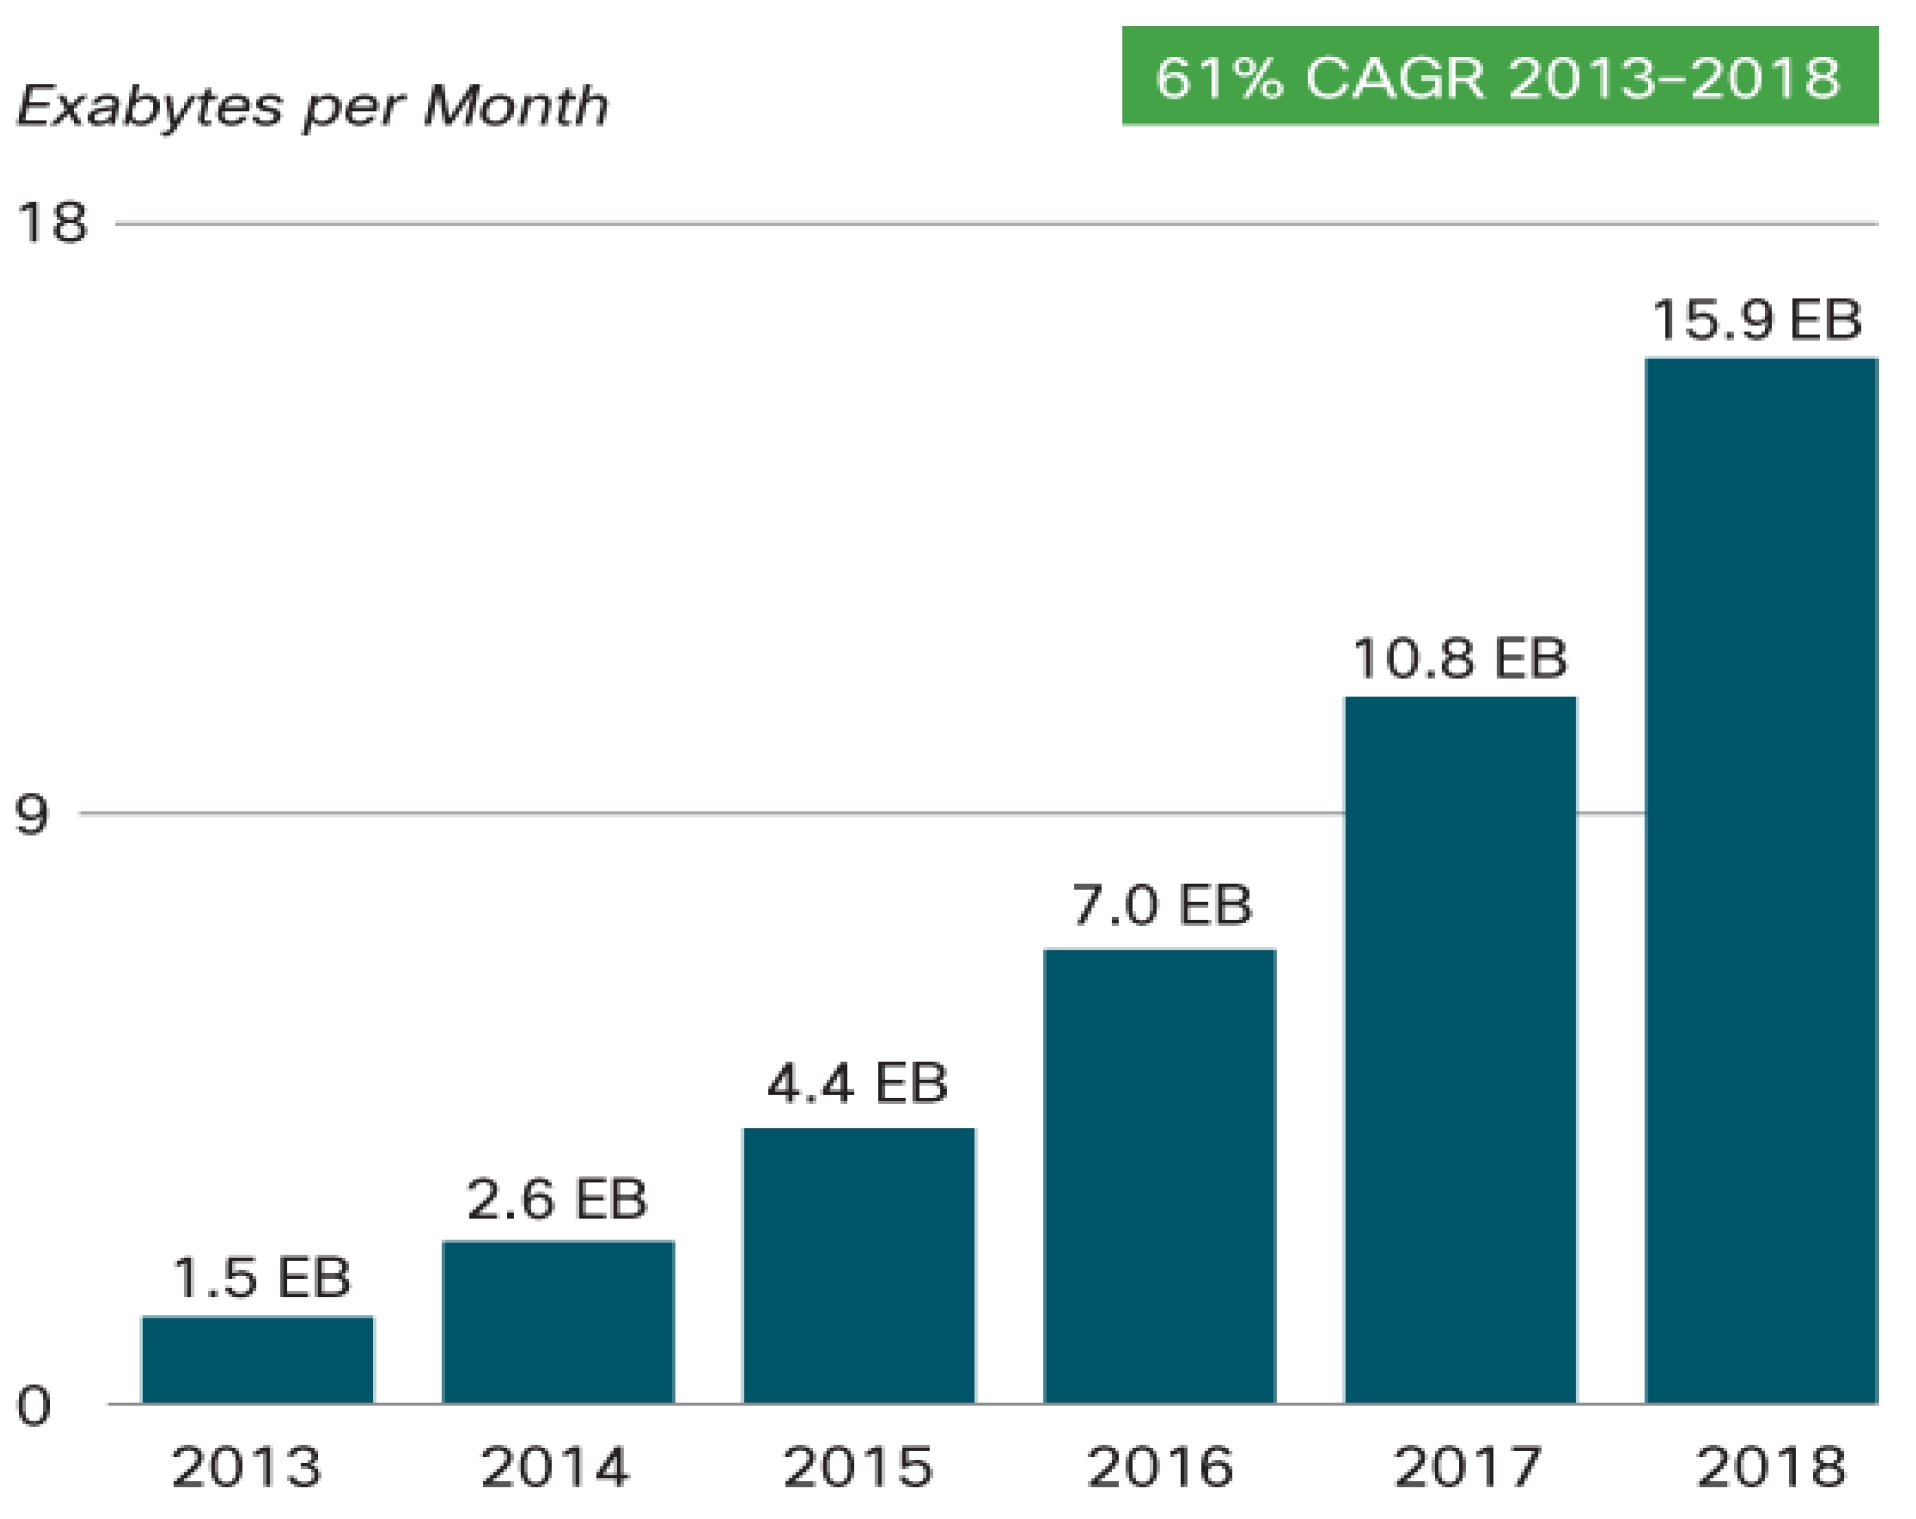  Cisco forecasts mobile data traffic of 15.9 Exabytes per month by 2018